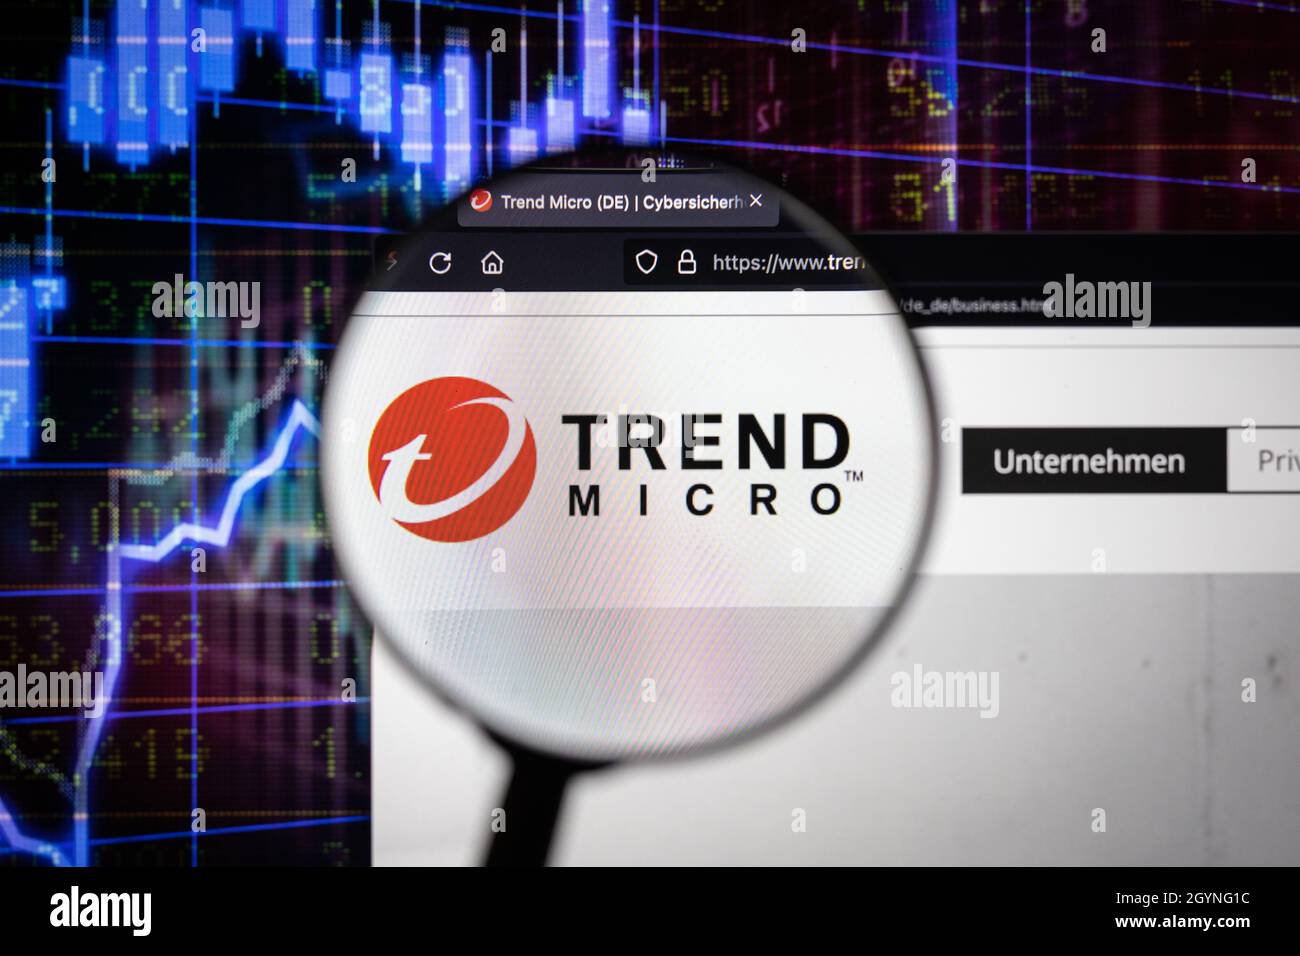 Trend Micro company logo on a website with blurry stock market developments in the background, seen on a computer screen through a magnifying glass Stock Photo